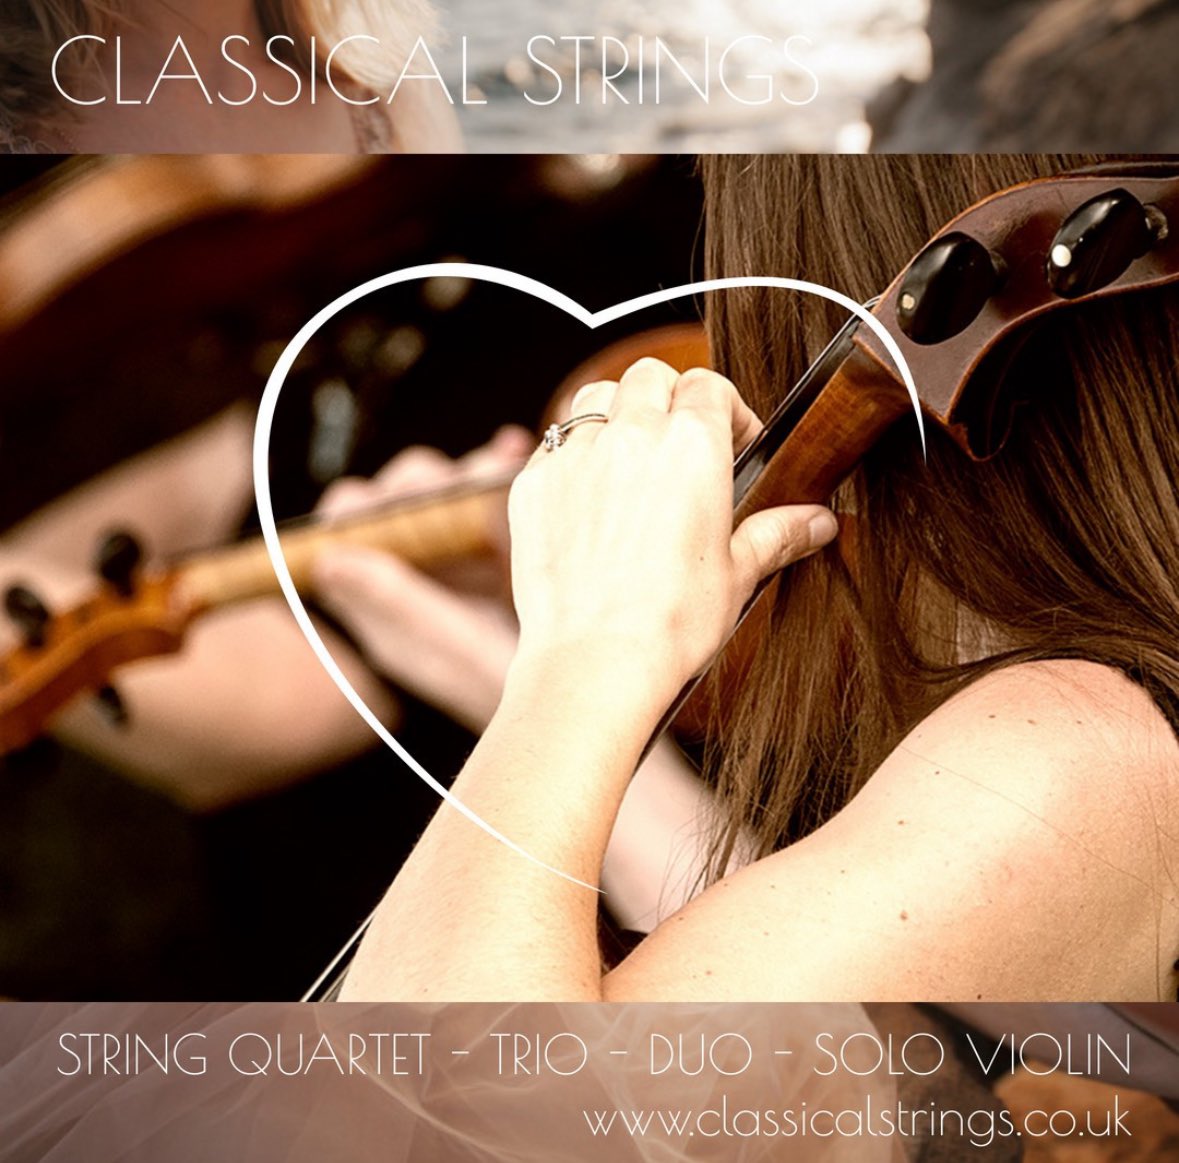 Imagine walking down the aisle to the  love song that brought you together...

Classical Strings Weddings
String Quartet - Trio - Duo - Solo Violin
Bespoke Wedding Music - @sueastonmusic 

#cornwallwedding #cornwallwedding #cornishwedding